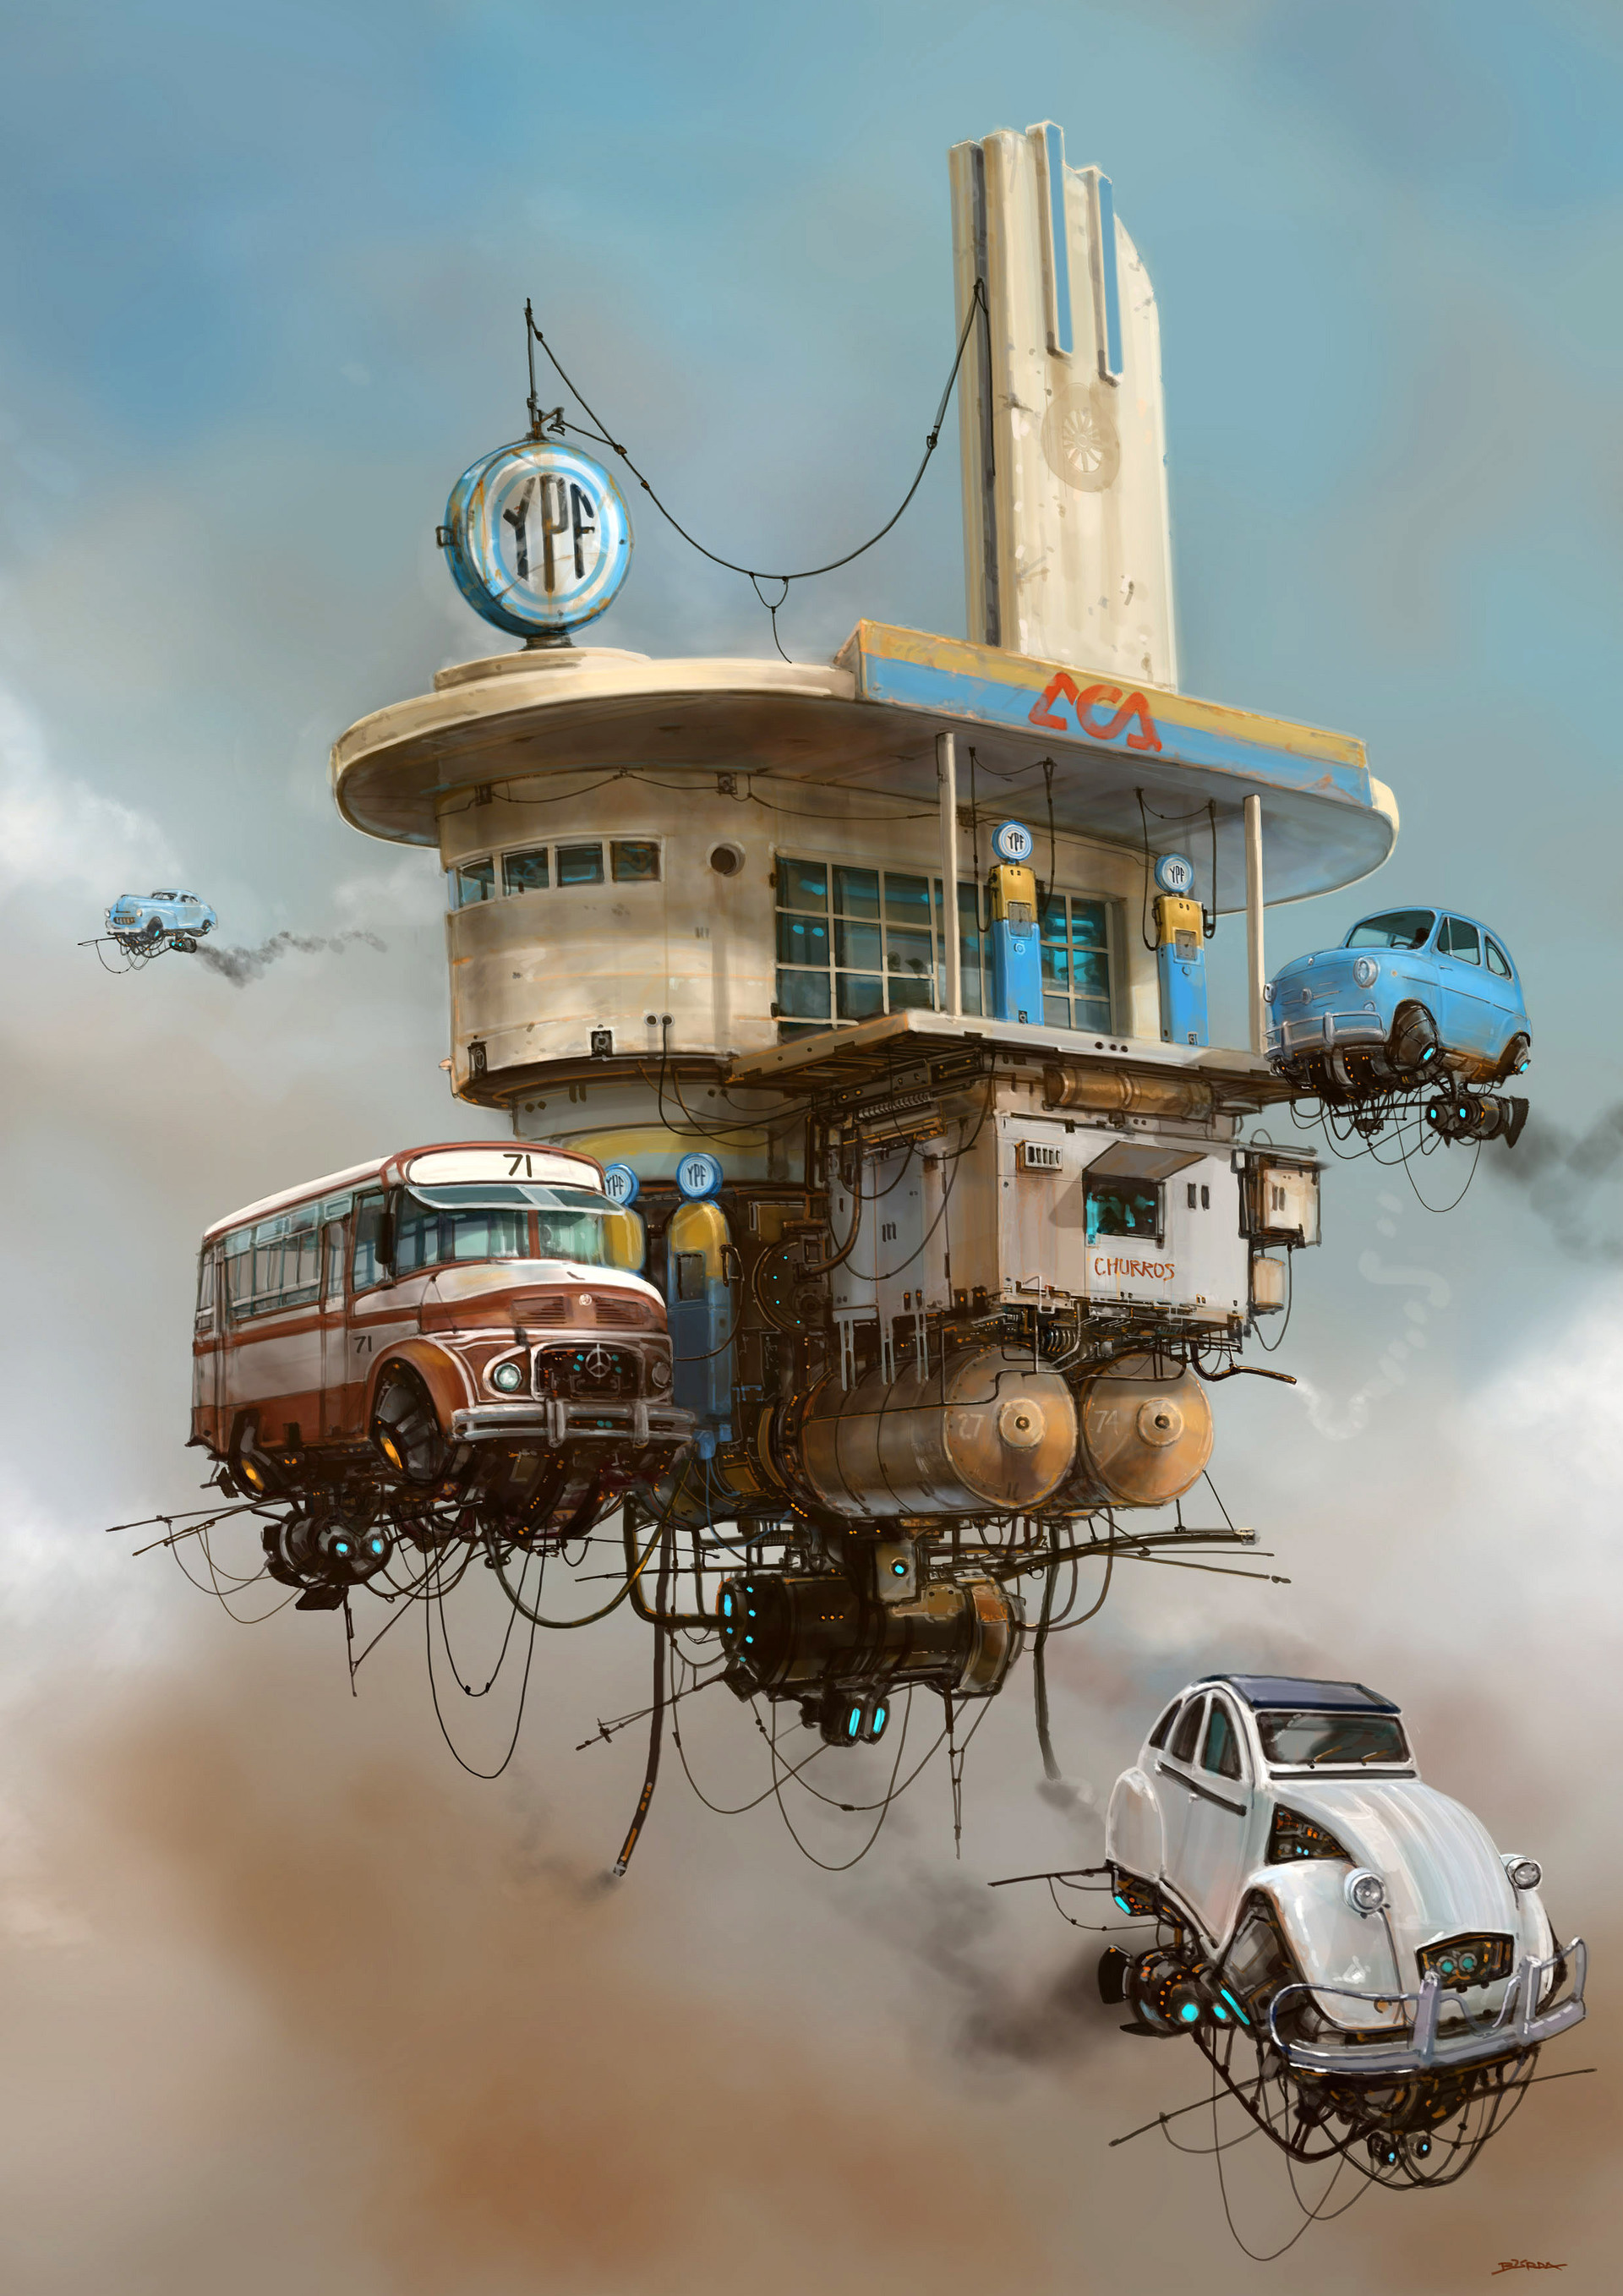 sci fi, art, auto, fiction, that's incredible, sky, building, ssi fi